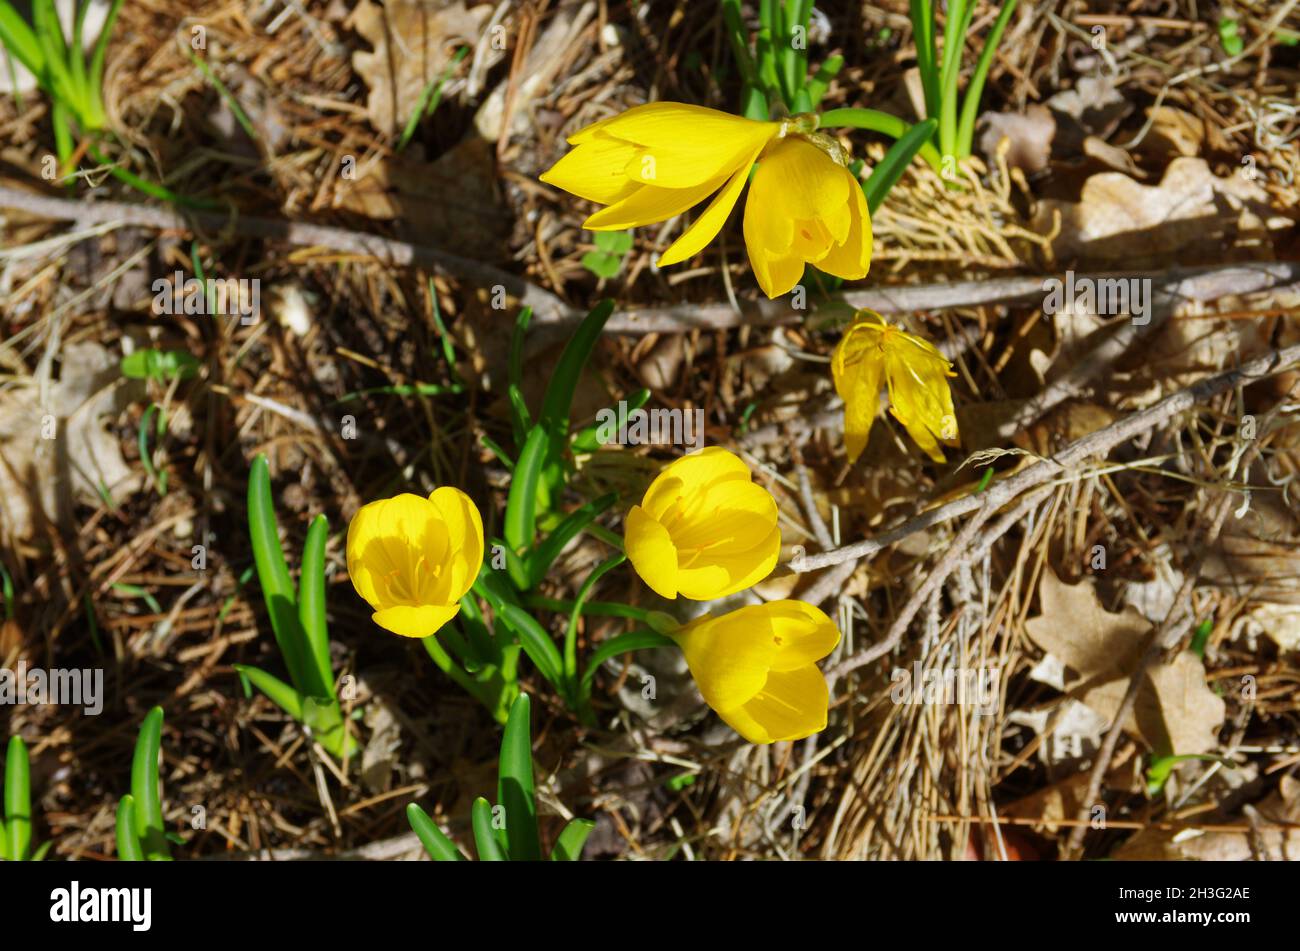 Autumn flowering of Sternbergia Lutea with yellow flowers similar to crocus Stock Photo